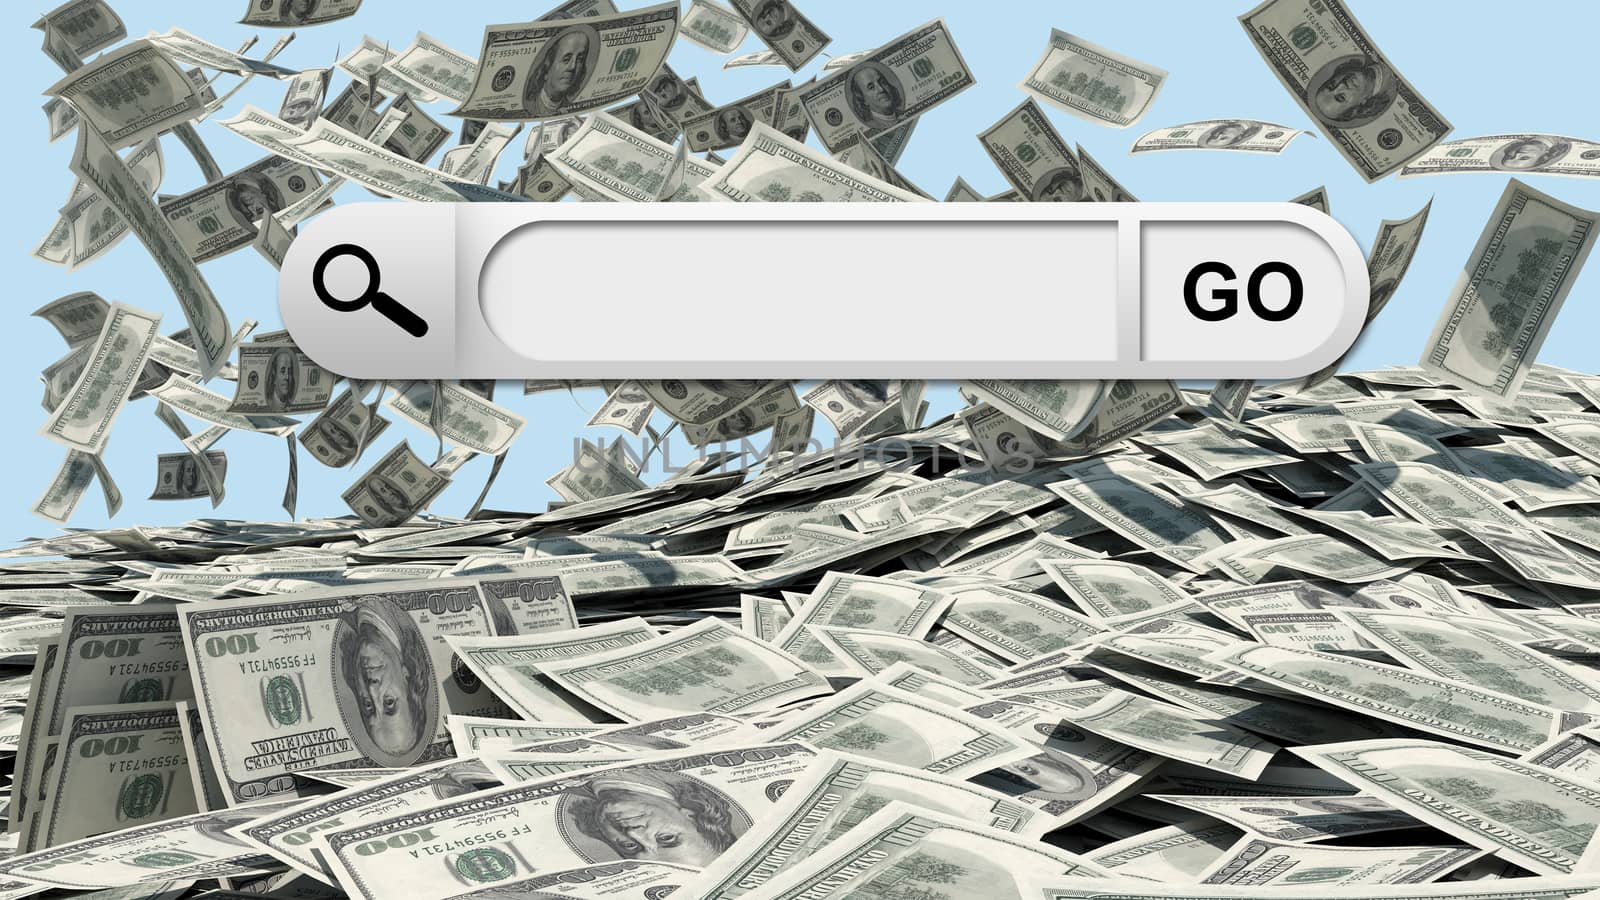 Search bar in browser. Dollars falling to the stack of dollars as backdrop